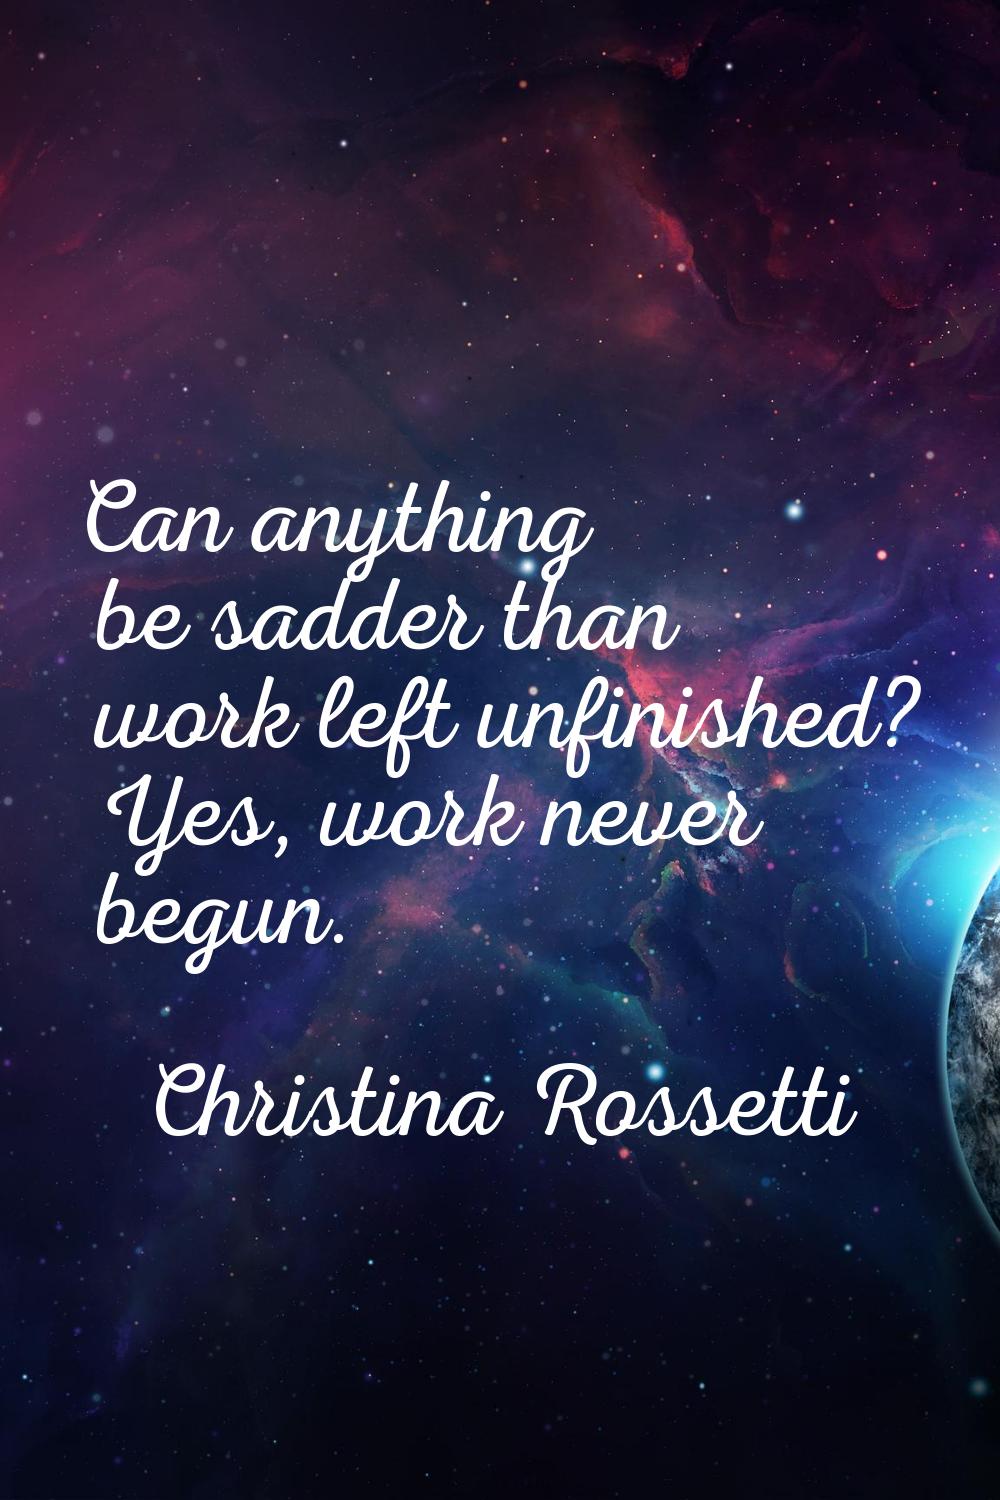 Can anything be sadder than work left unfinished? Yes, work never begun.